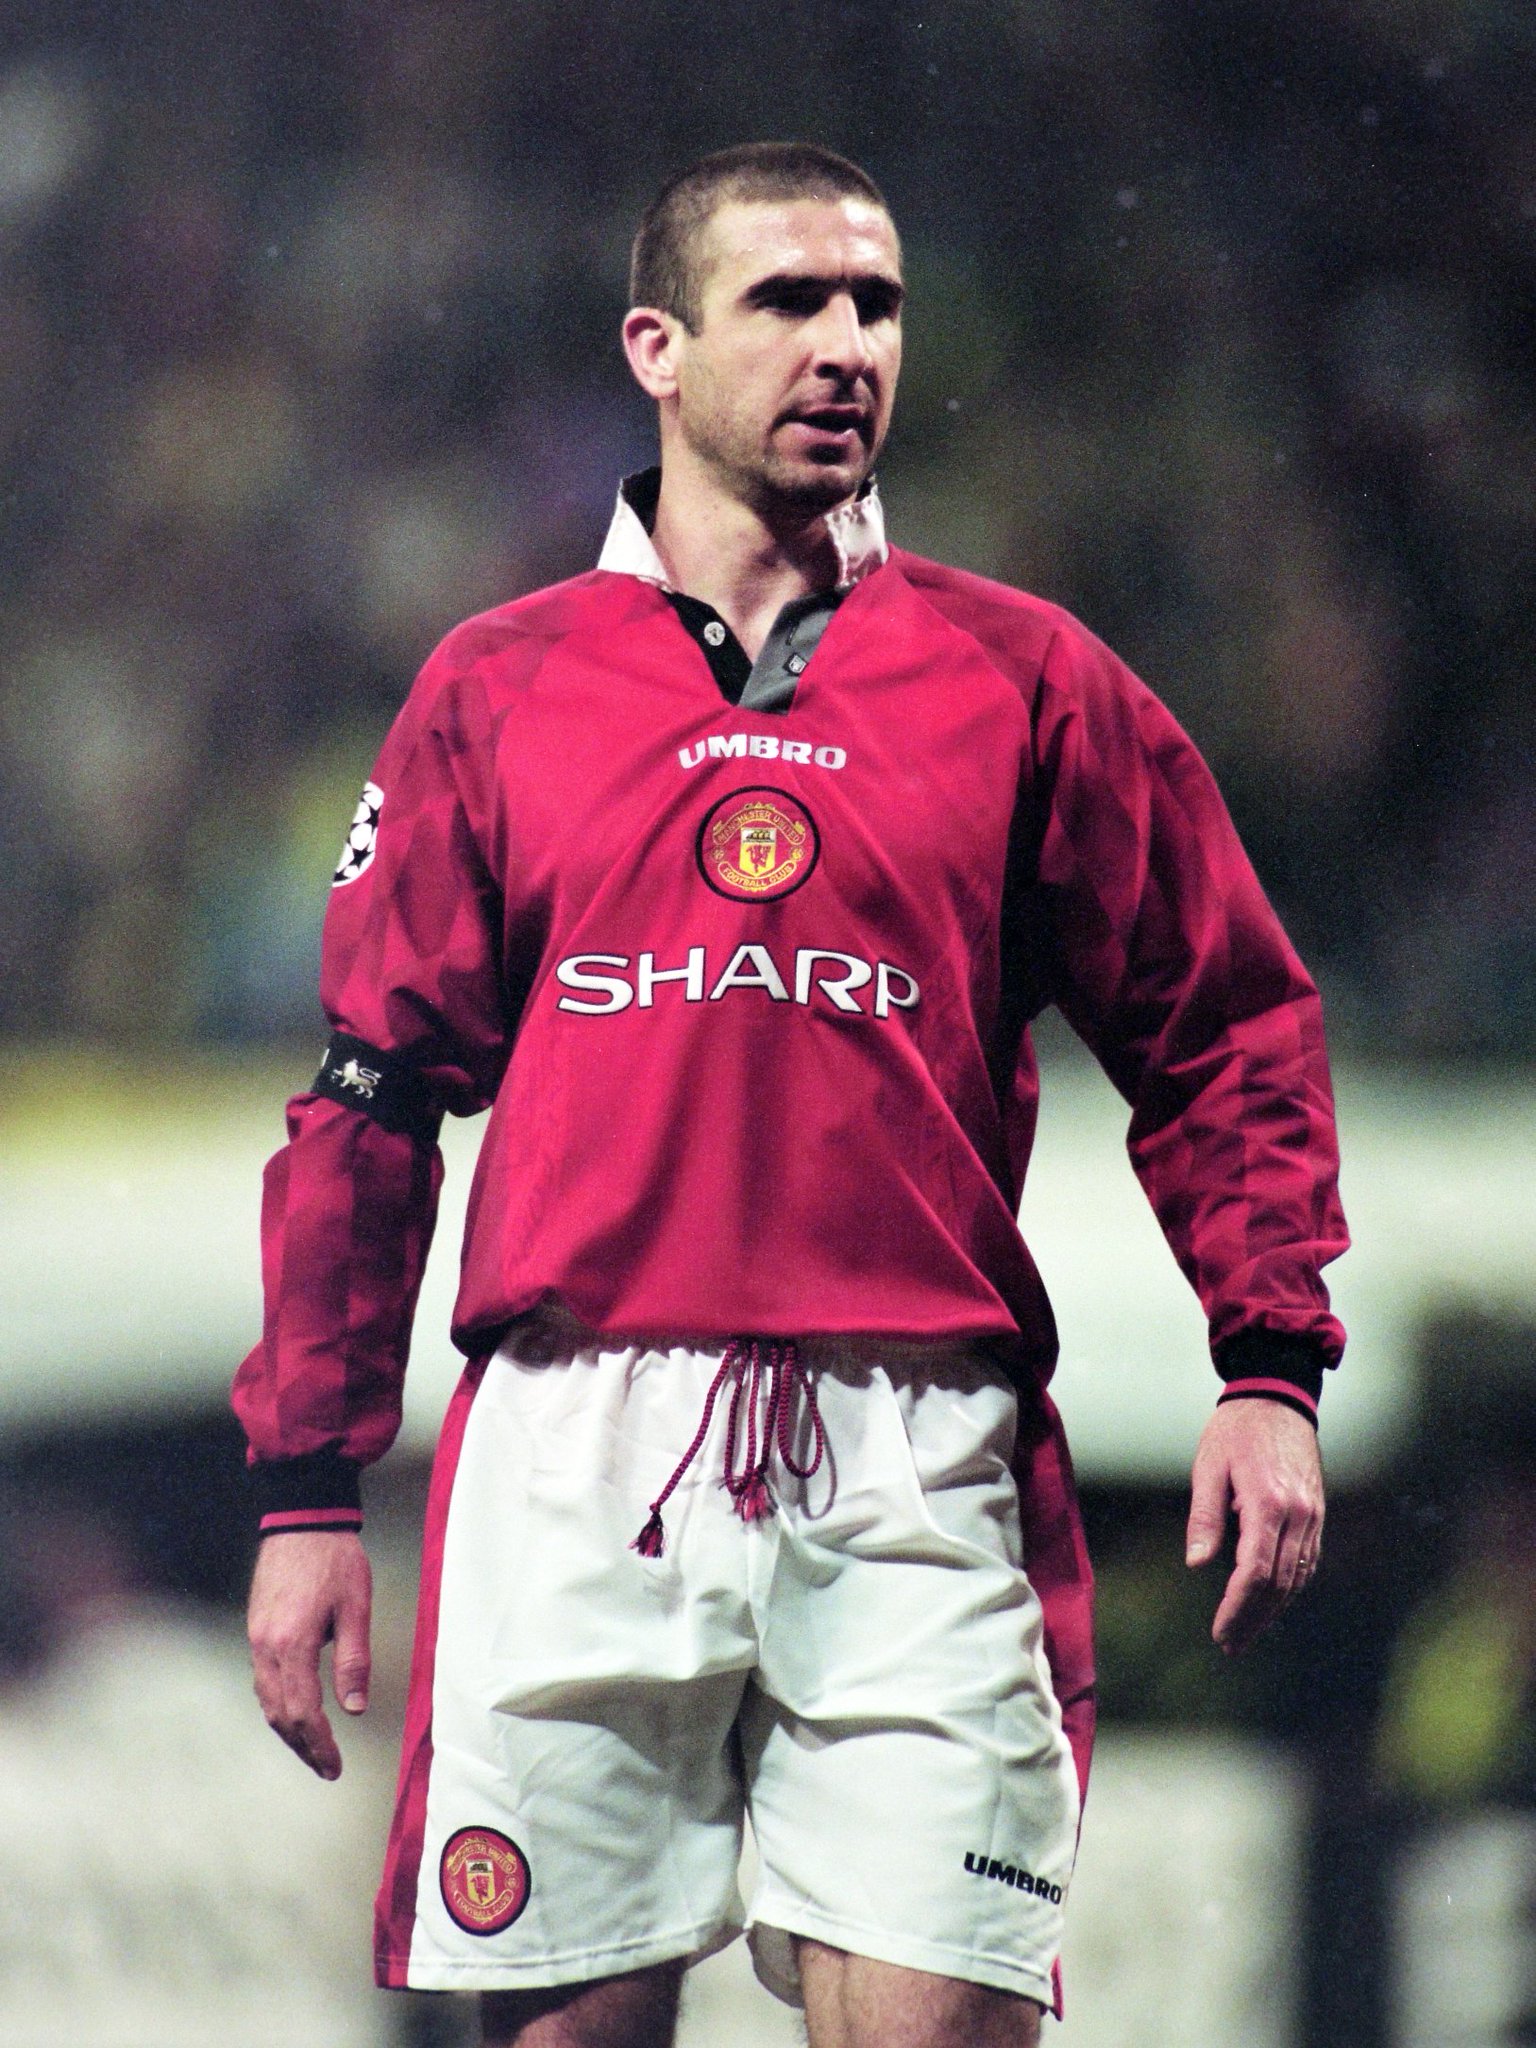 The Manchester United legend turns 56 today! Happy birthday Eric Cantona  : Etsuo Hara (Getty Images) 